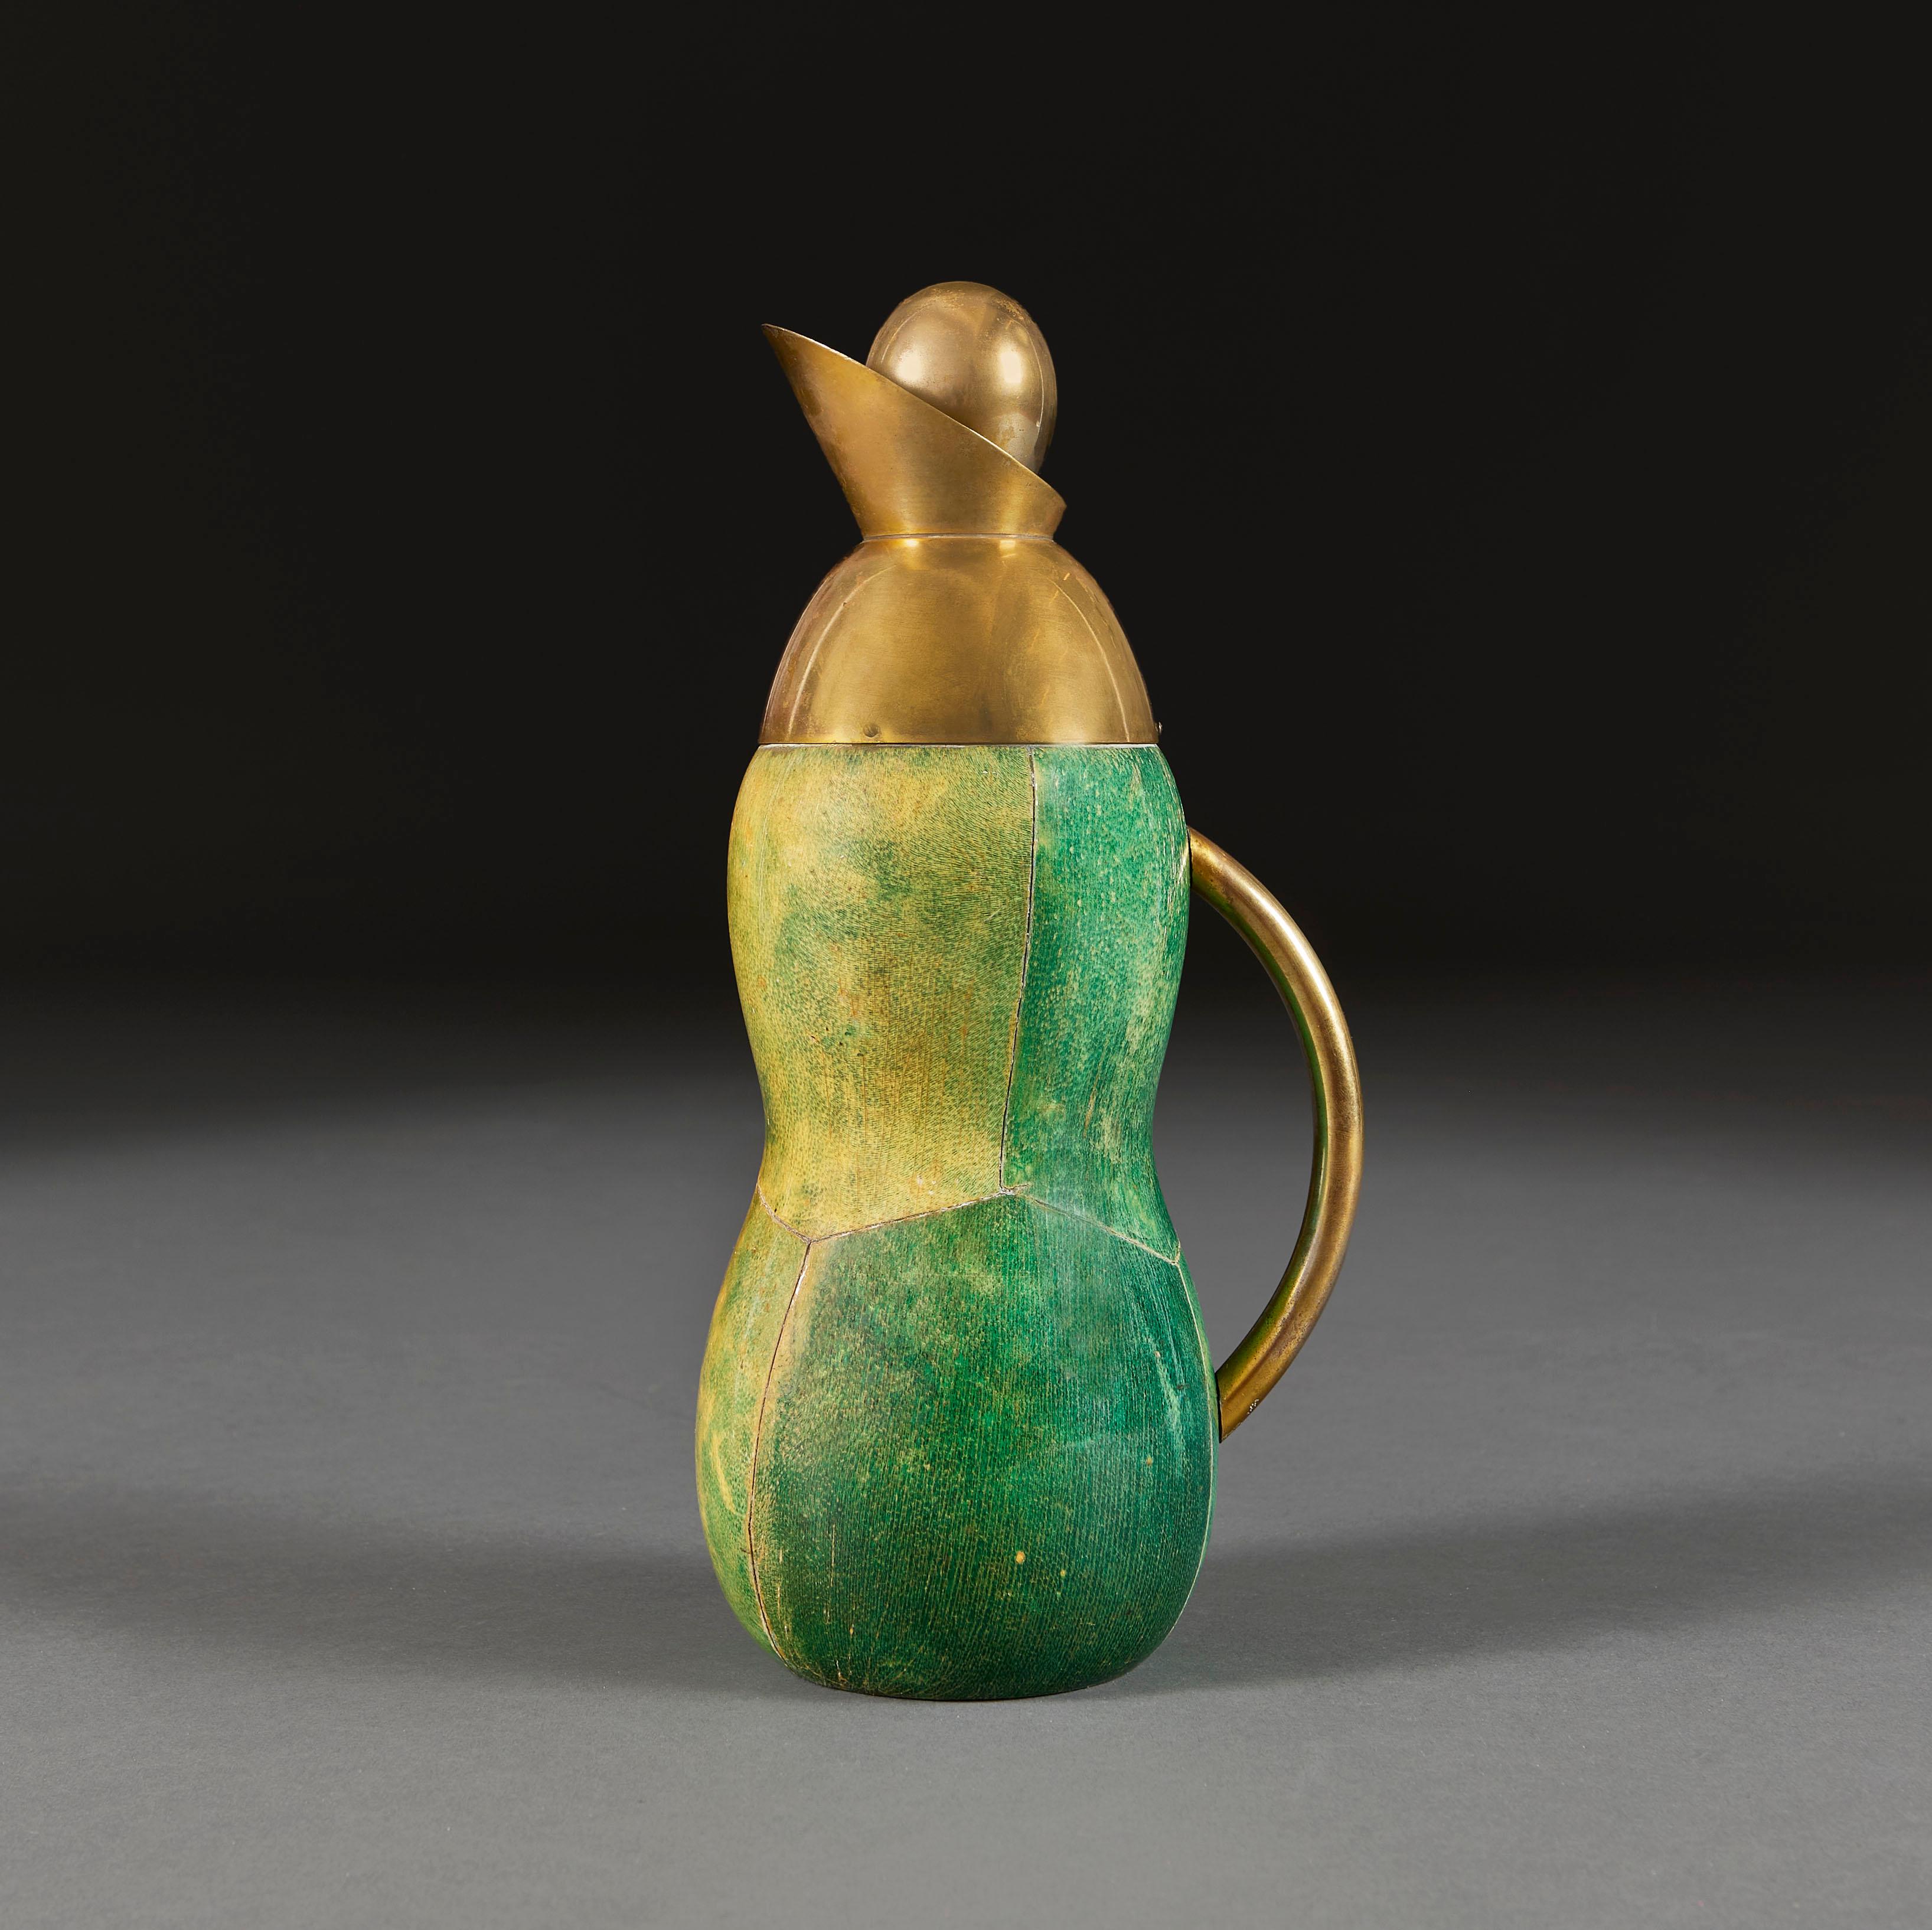 Italy, circa 1970

An unusual mid century Italian thermos flask with a wooden segmented body finished in lacquered vellum that is dyed green to simulate shagreen, with brass handle and spout.

Height 31.00cm
Width 14.00cm
Depth 11.00cm